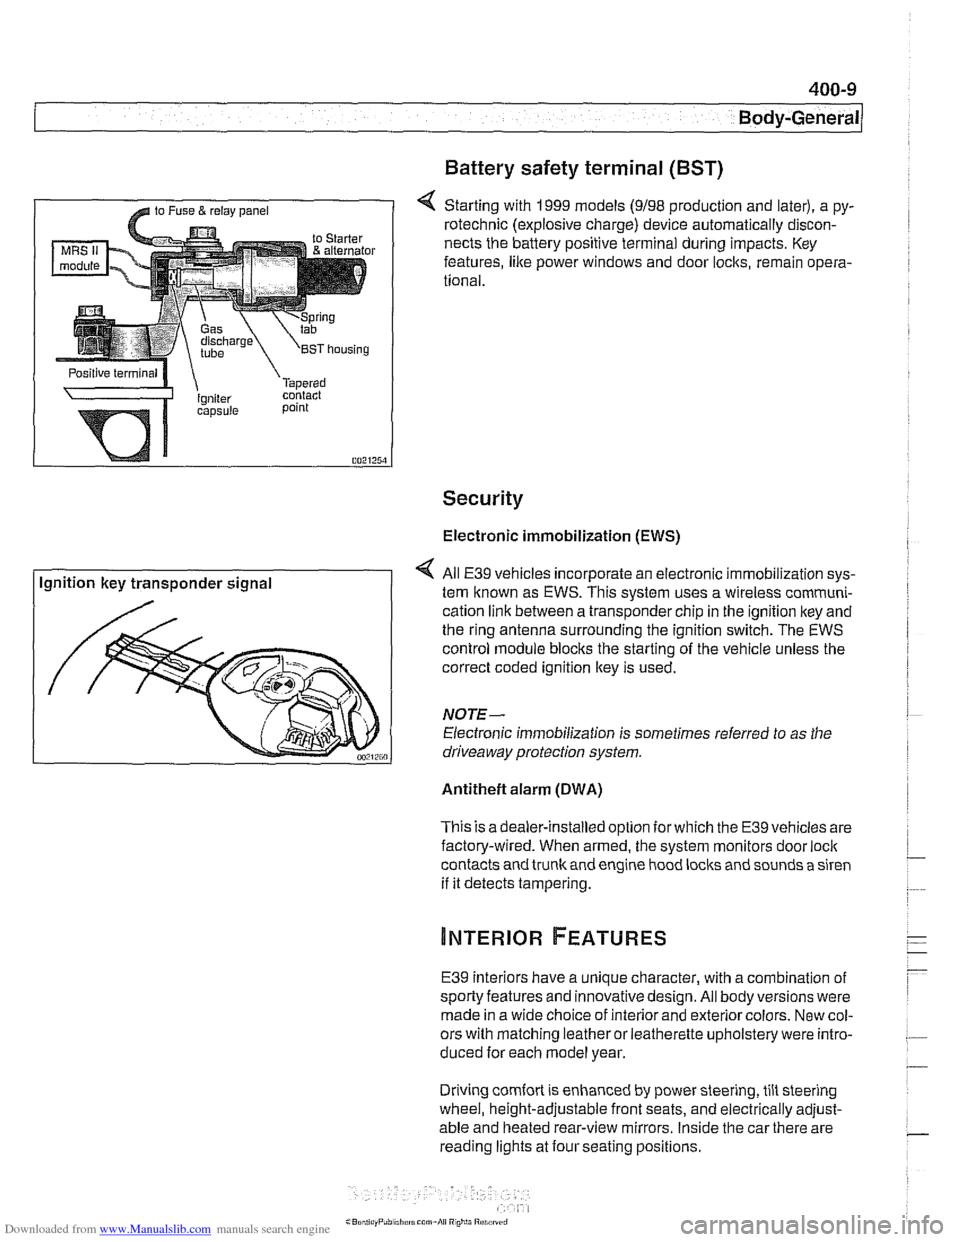 BMW 530i 2001 E39 Workshop Manual Downloaded from www.Manualslib.com manuals search engine 
400-9 
Body-General 
Battery  safety terminal 
(BST) 
4 Starting  with 1999 models (9198 production  and later), a py- 
rotechnic  (explosive 